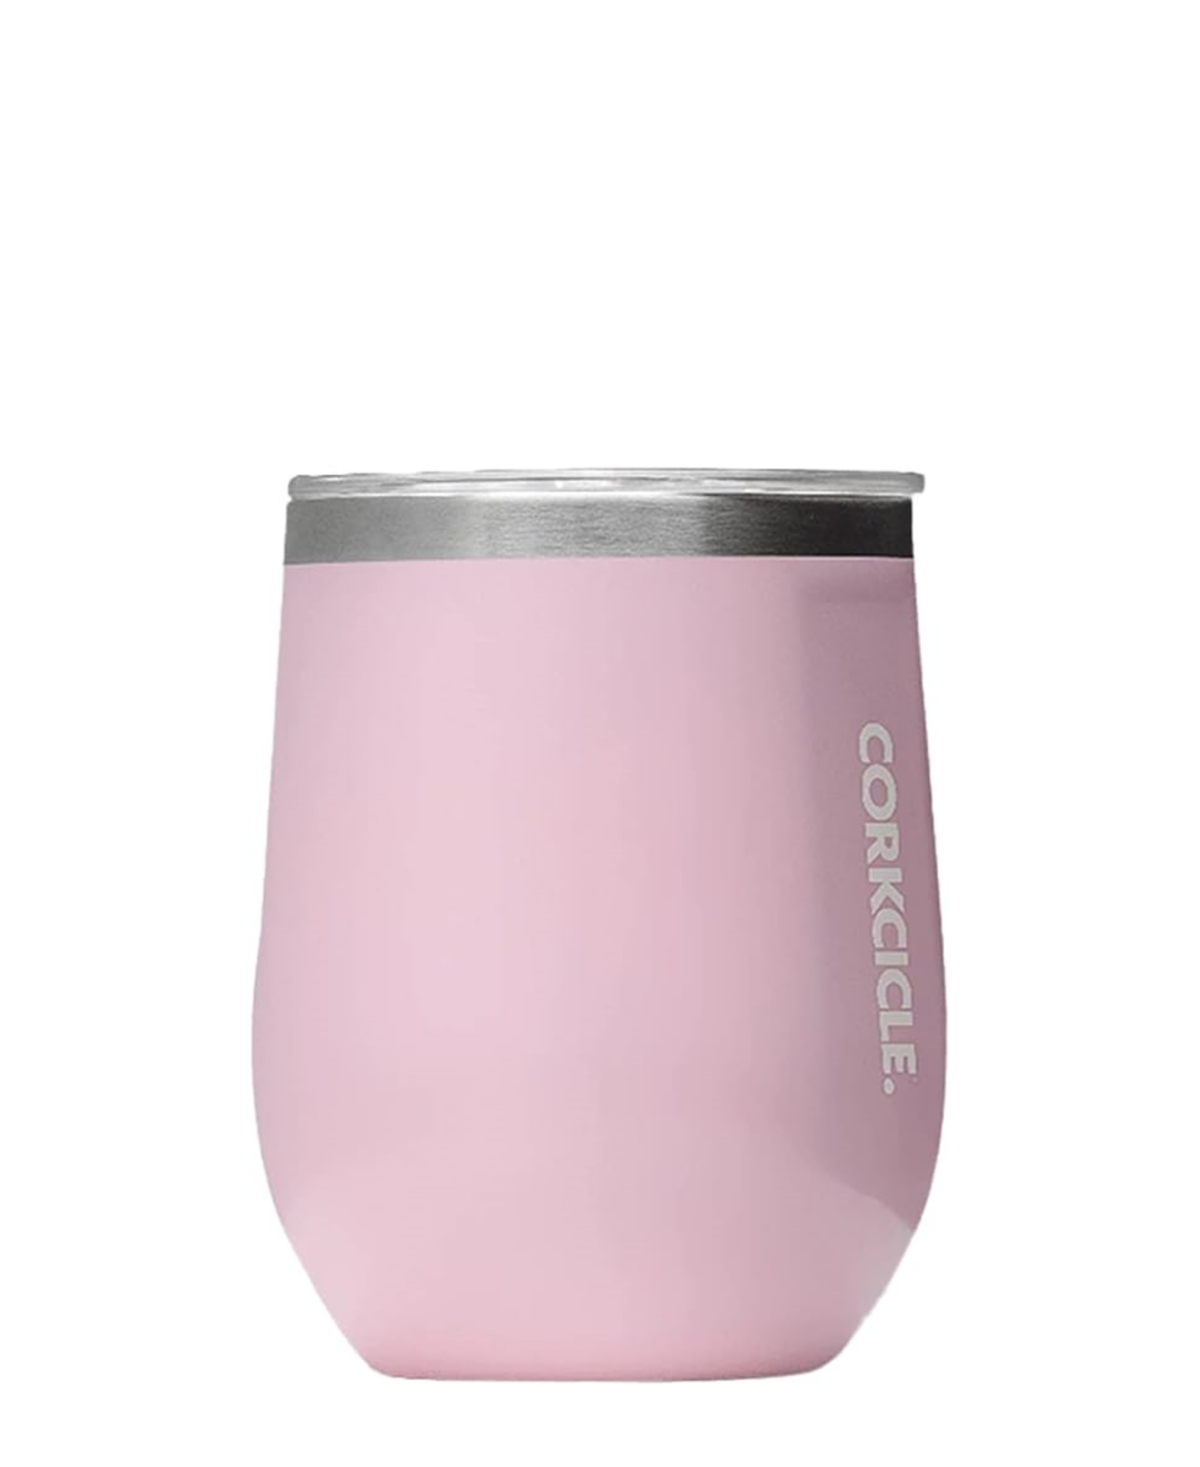 Corkcicle 12-oz. Pink Stainless Steel Stemless Mug In No Color